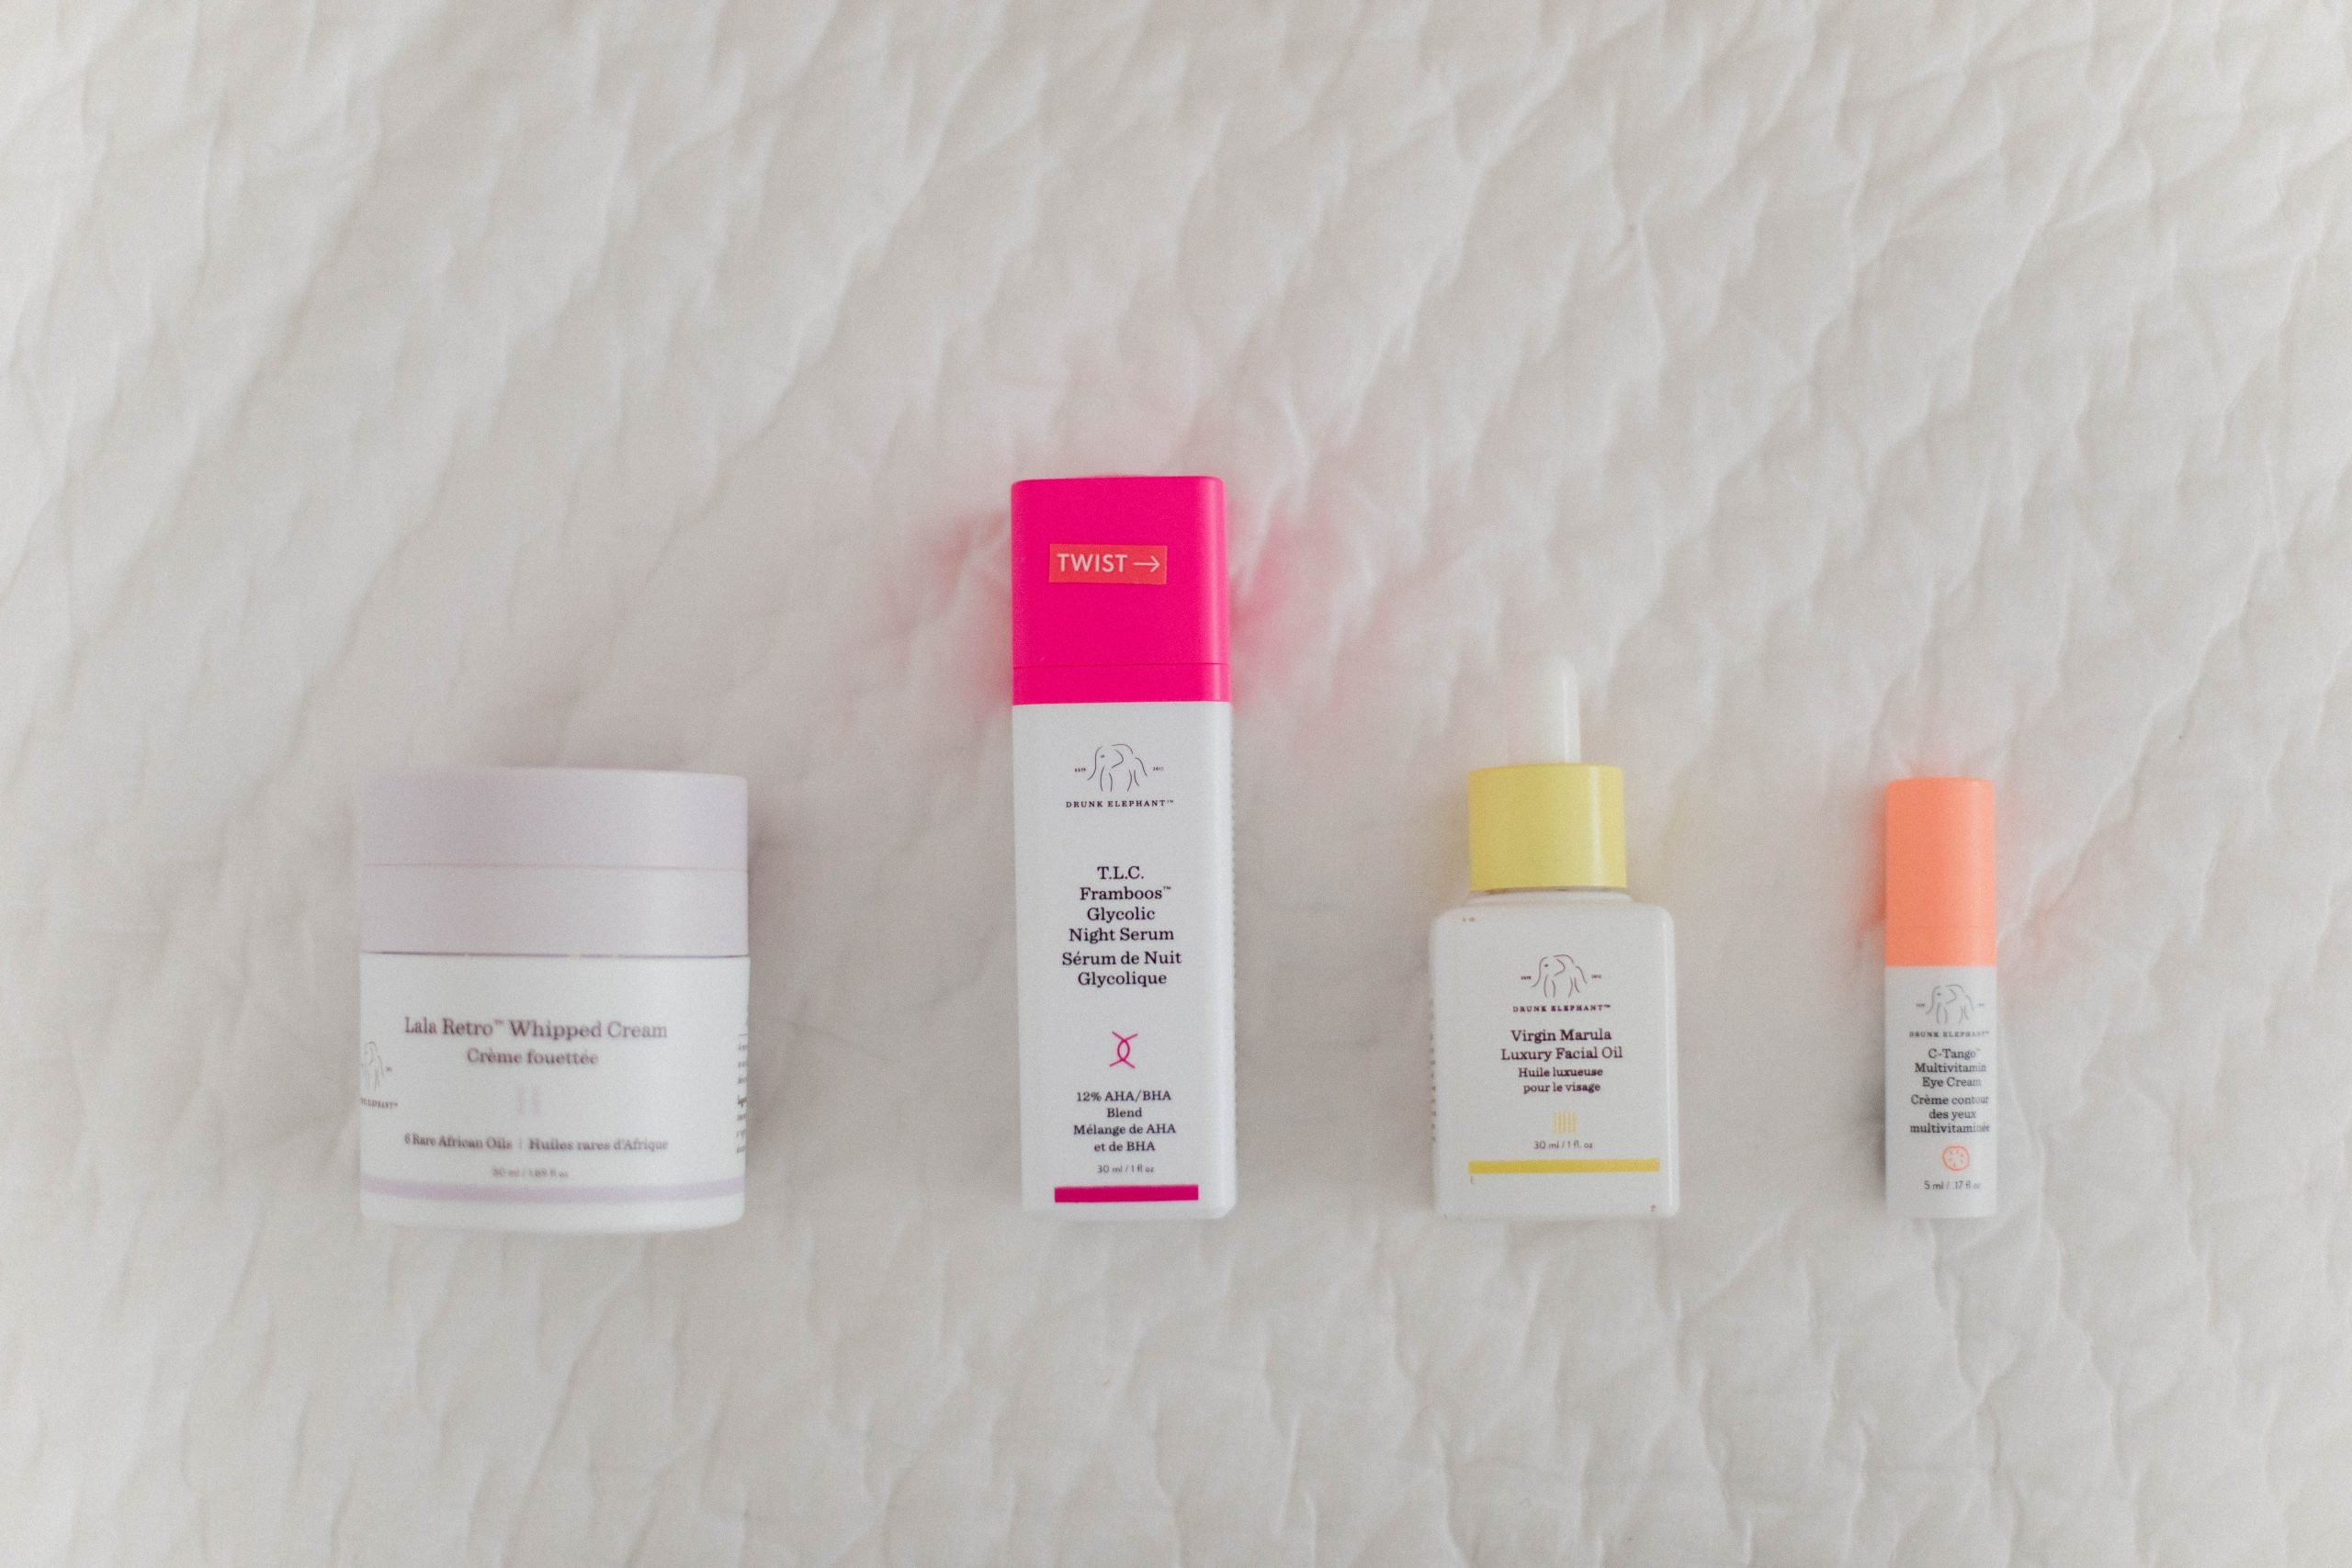 My Favorite Drunk Elephant Products